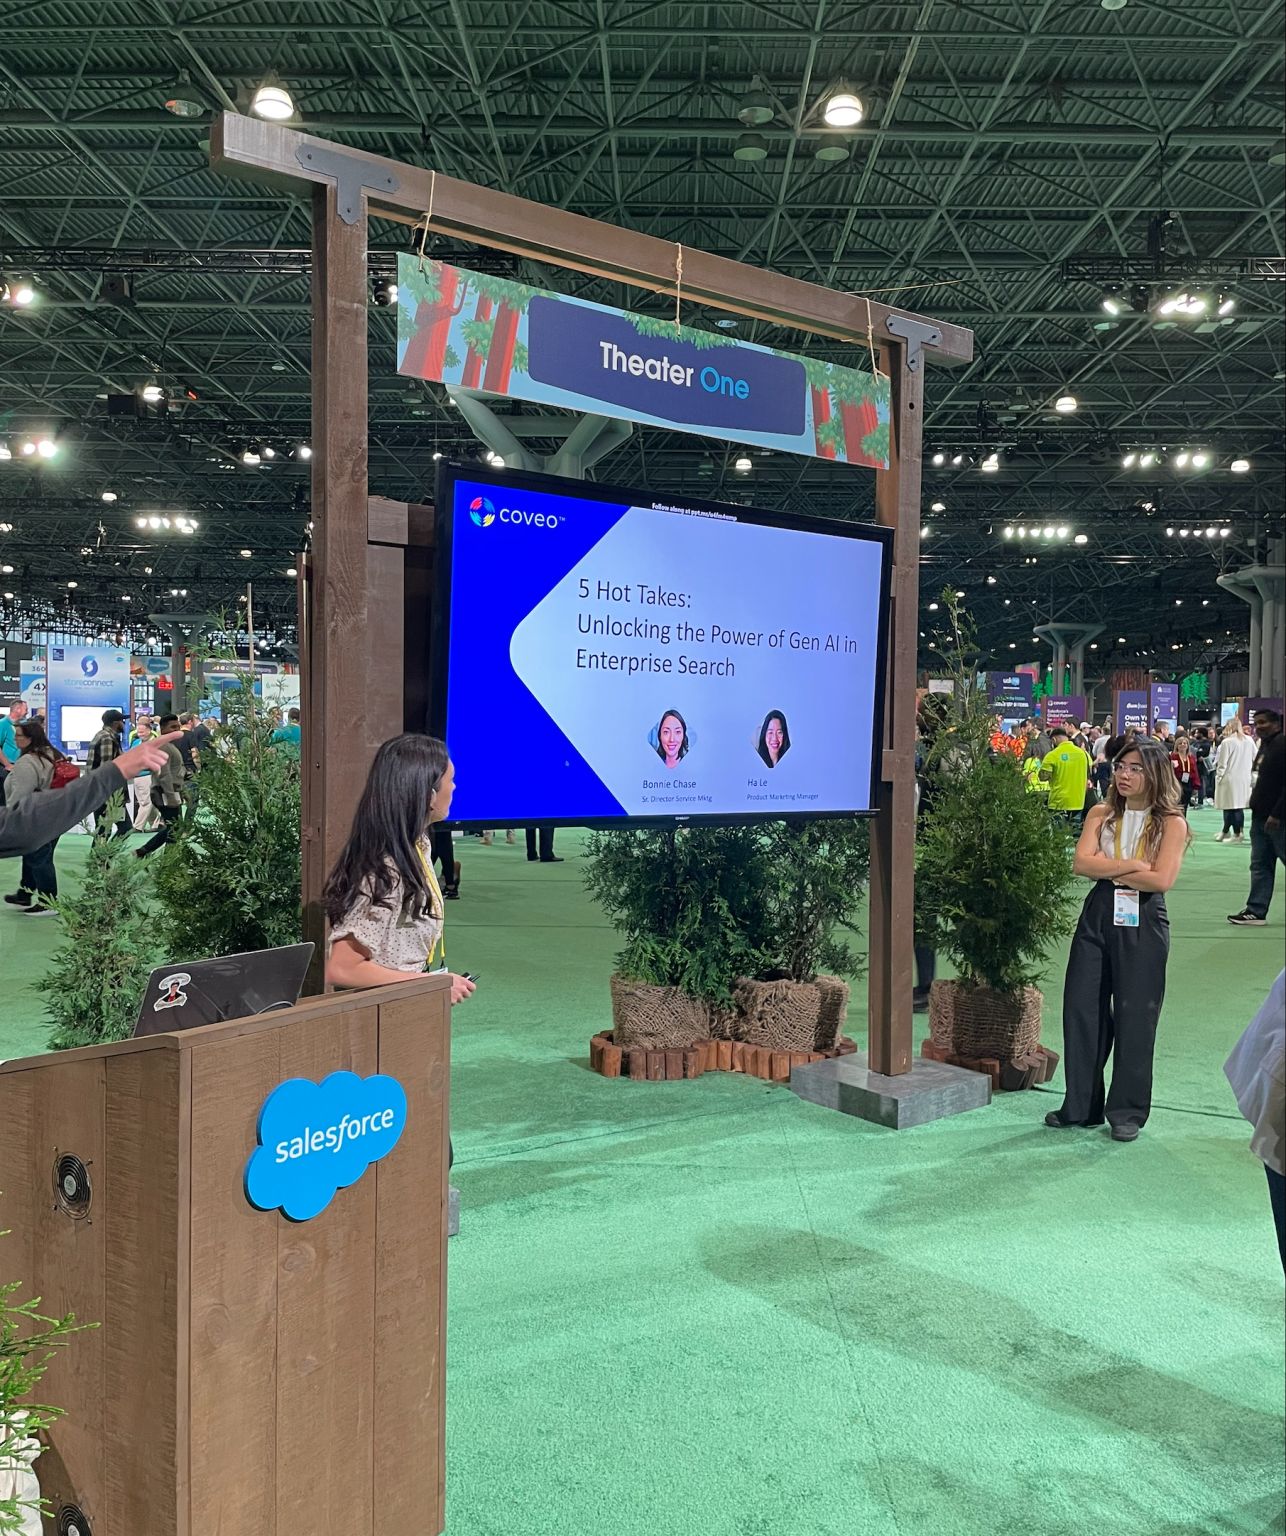 4 Key Takeaways from Coveo’s Speaking Session at Salesforce World Tour in NYC / Blogs / Perficient